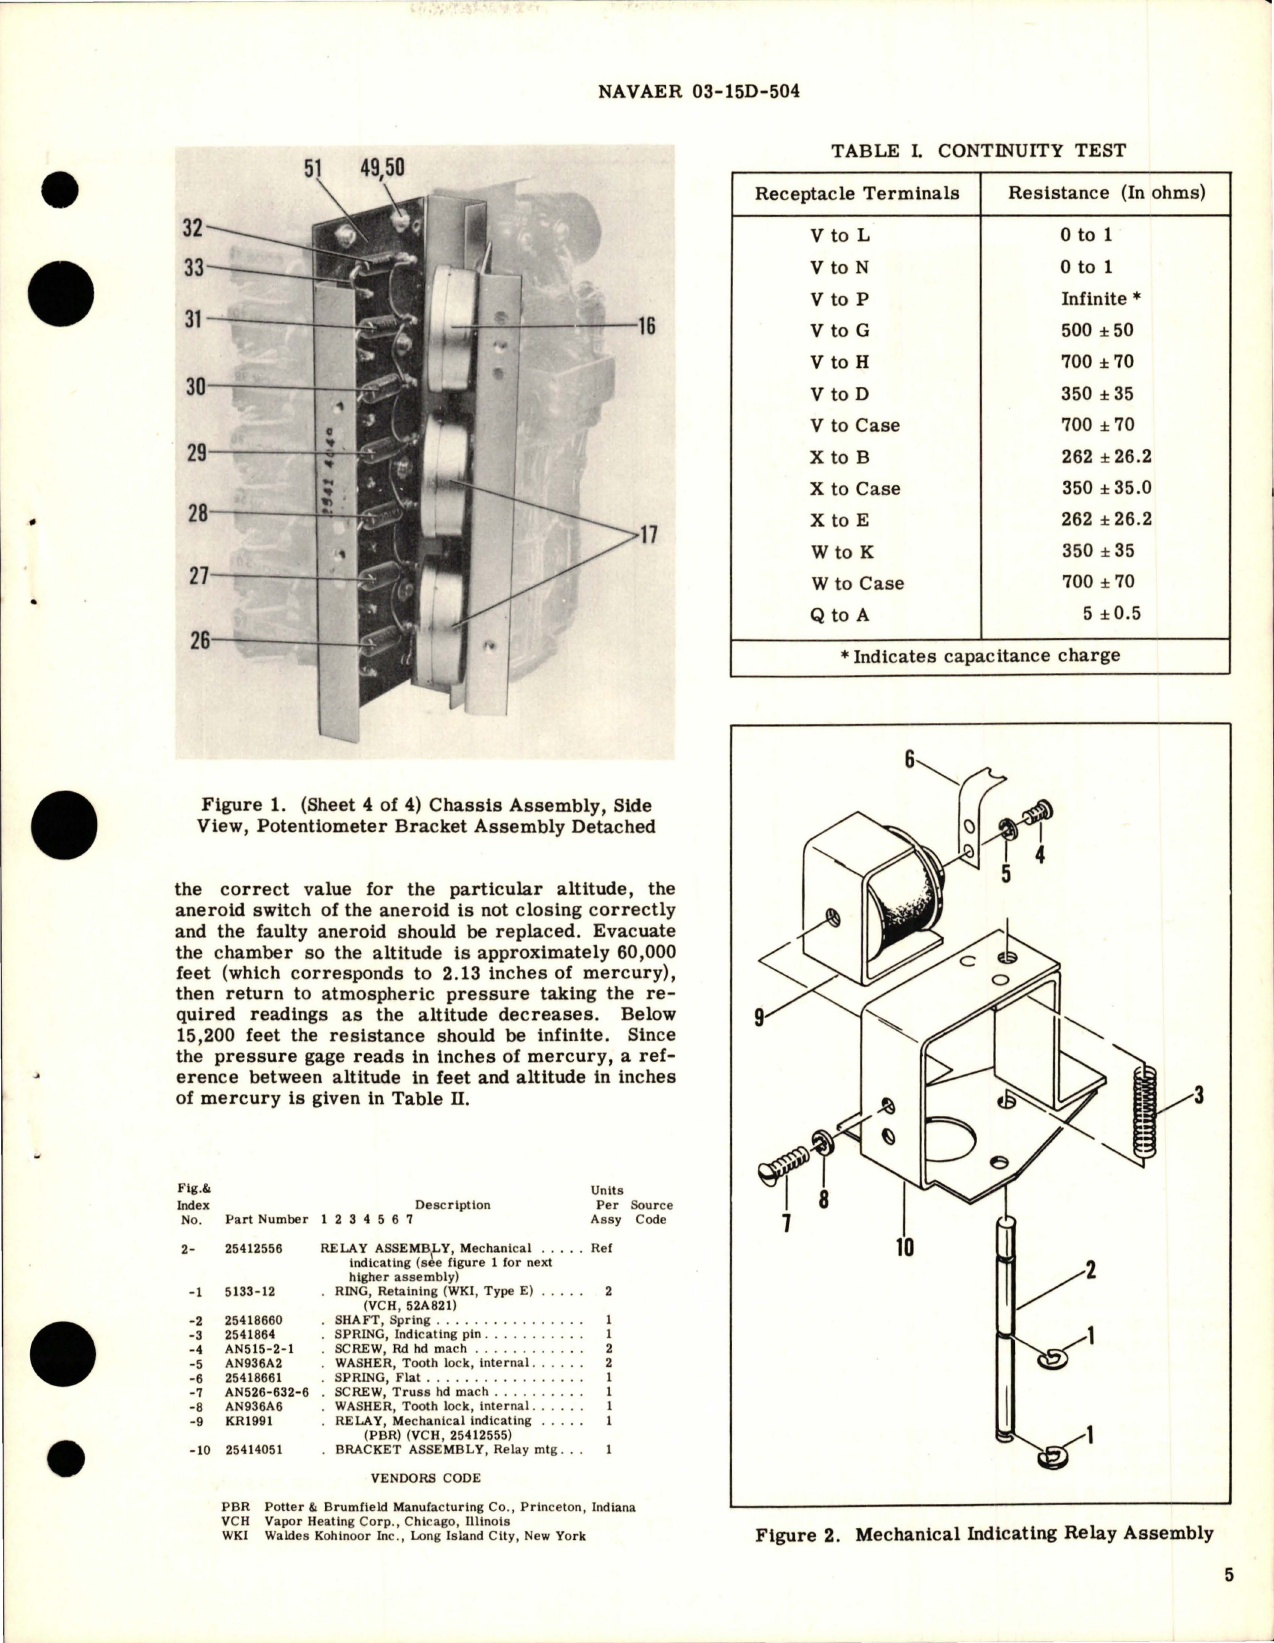 Sample page 5 from AirCorps Library document: Overhaul Instructions with Parts for Temperature System Control Box - 53C236-1